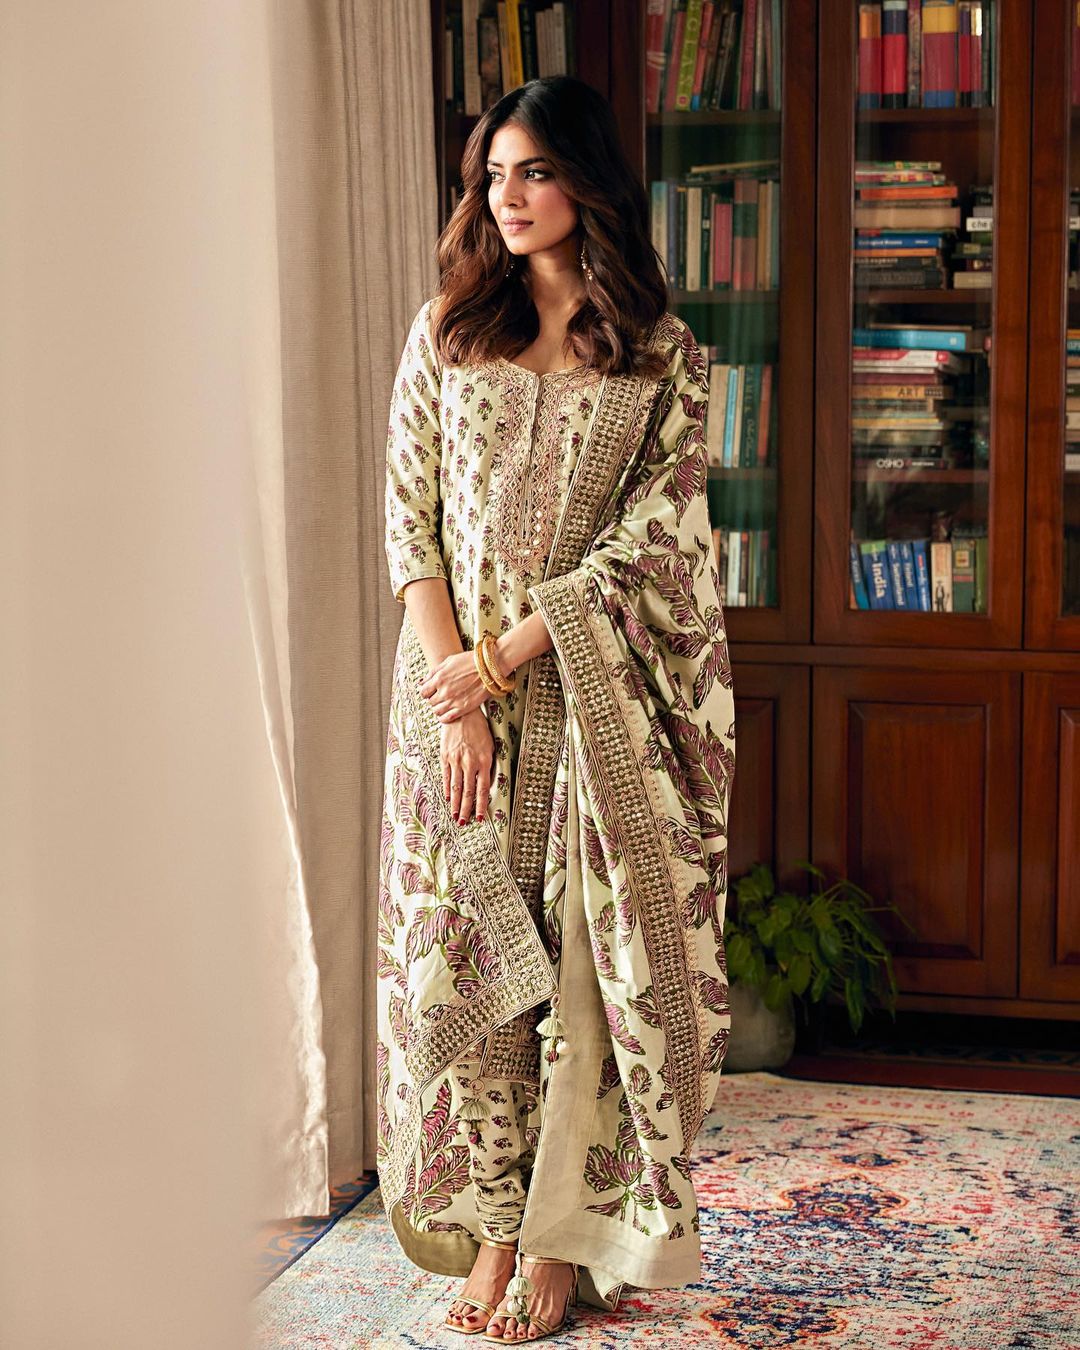 Malavika Mohanan cuts a statusque figure in the floral suit.